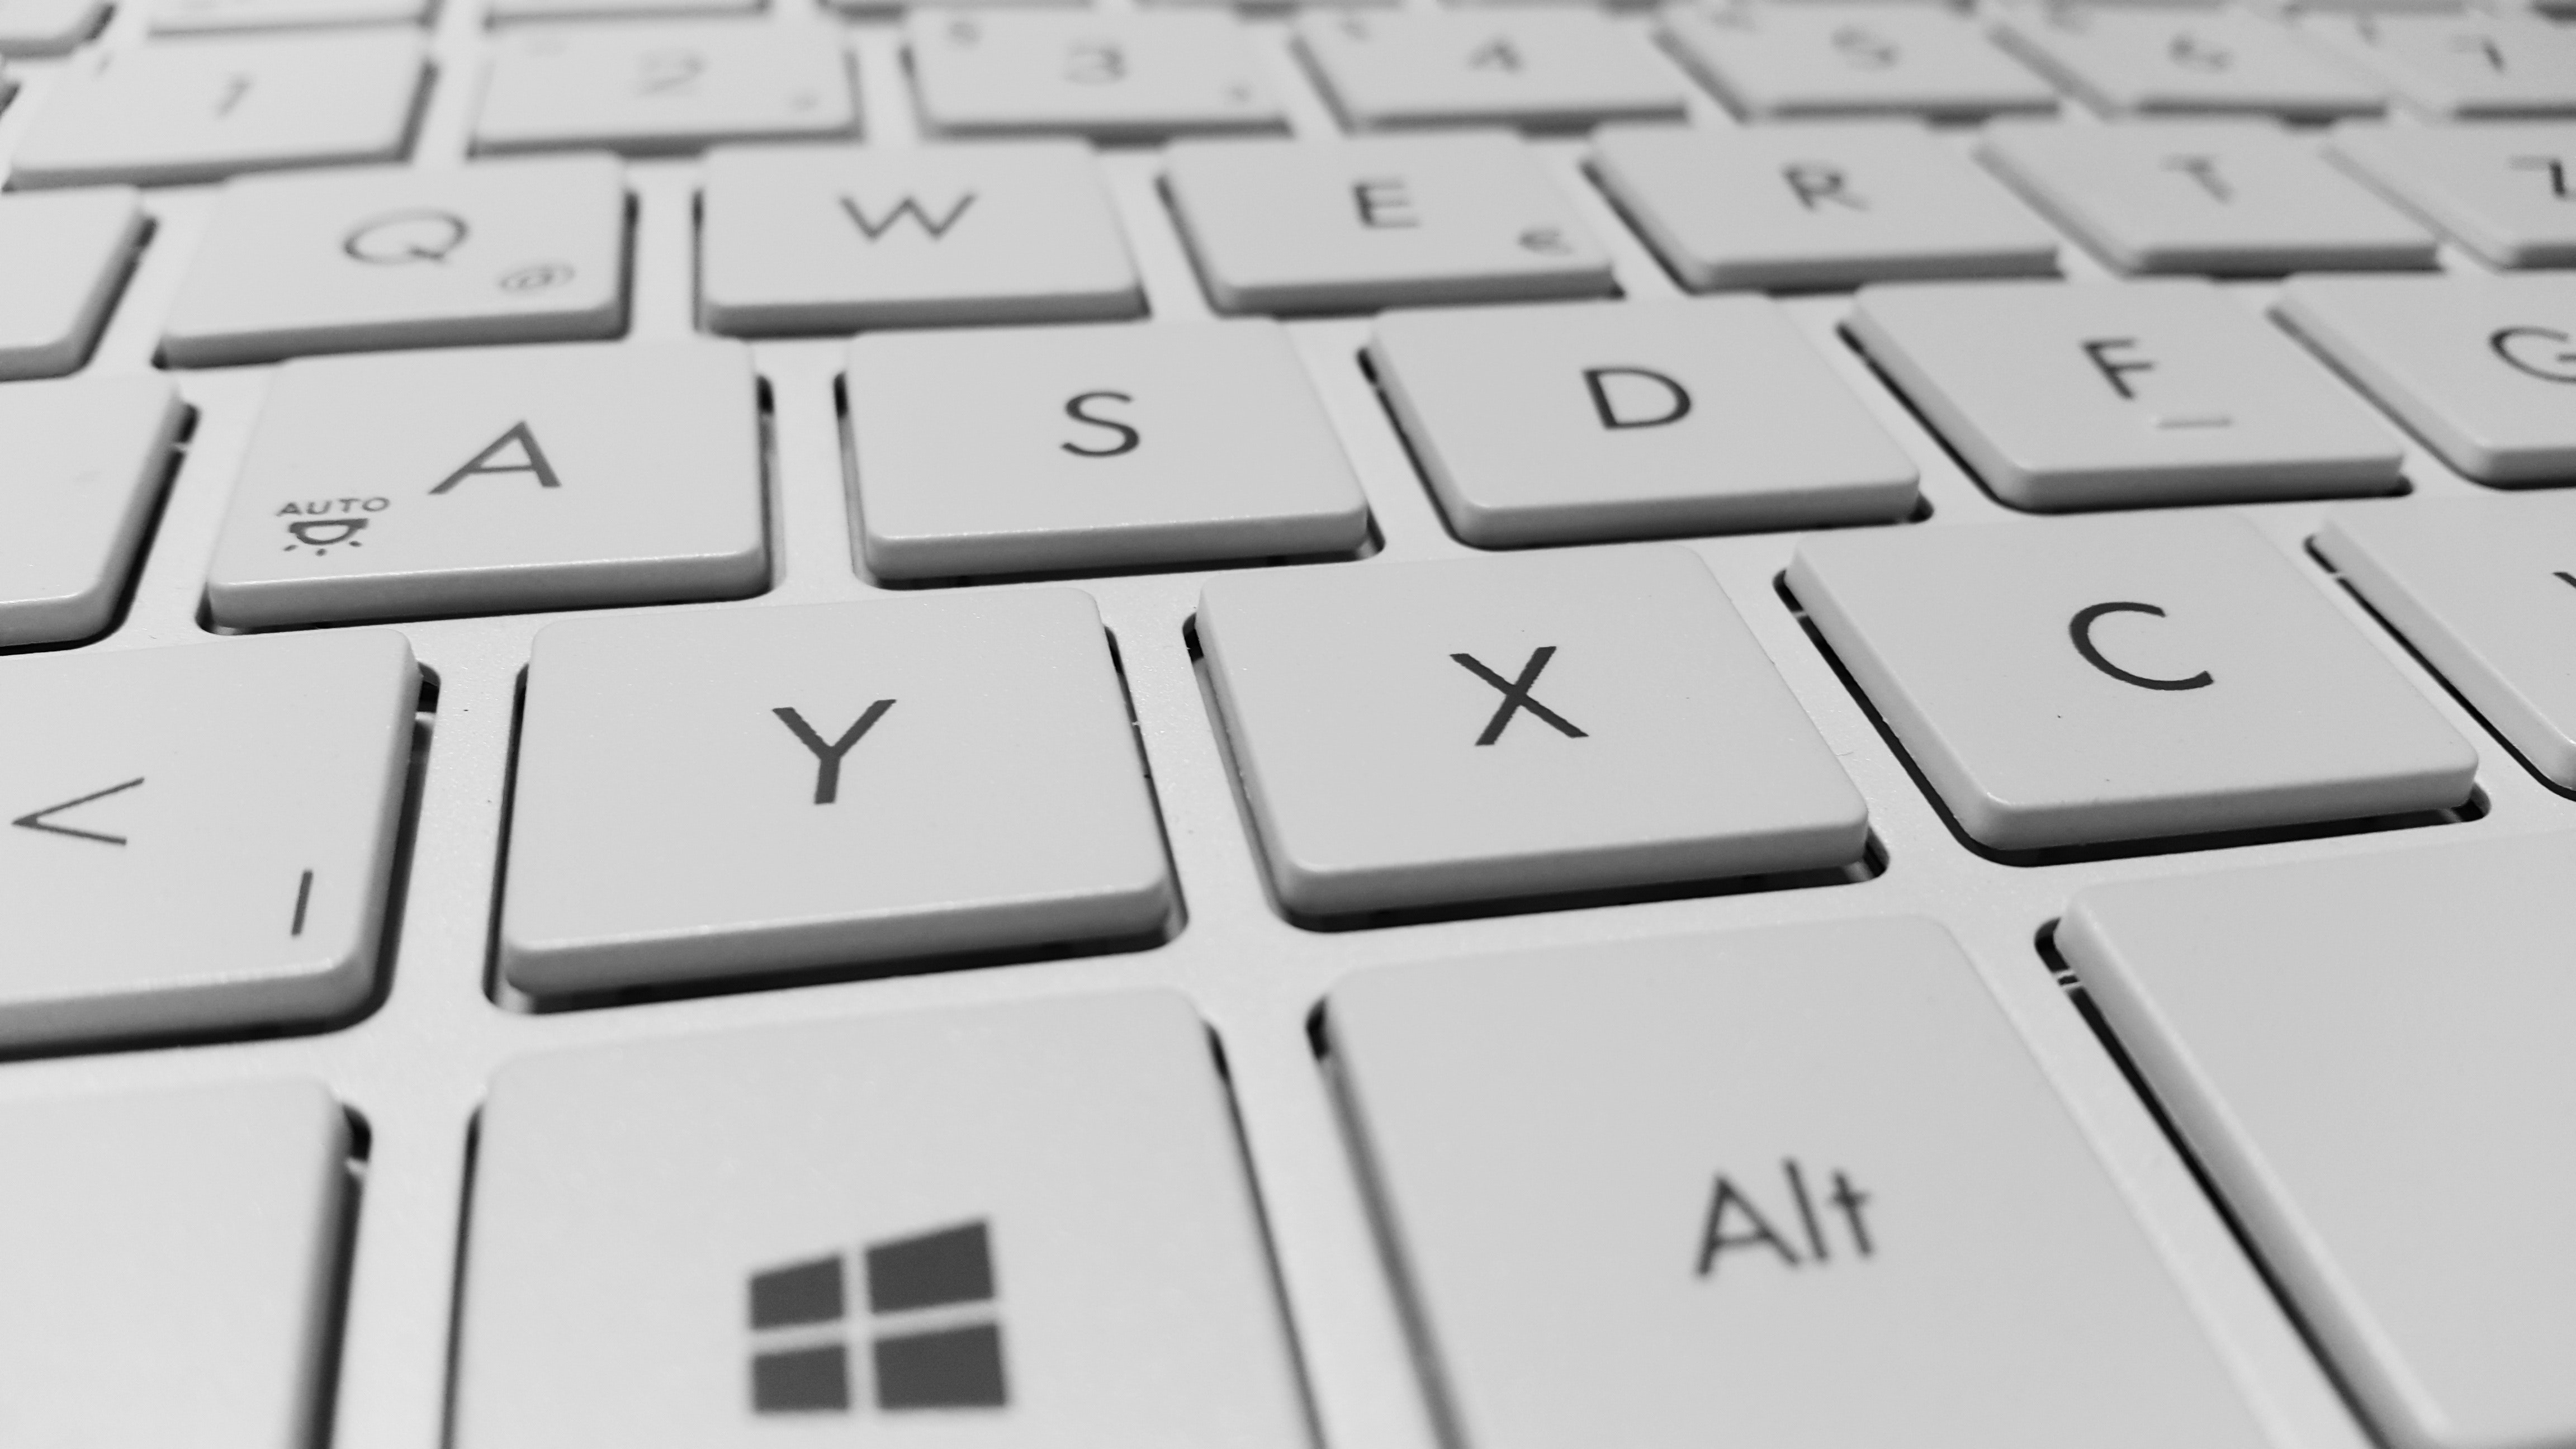 Close up of Windows keyboard - click to zoom